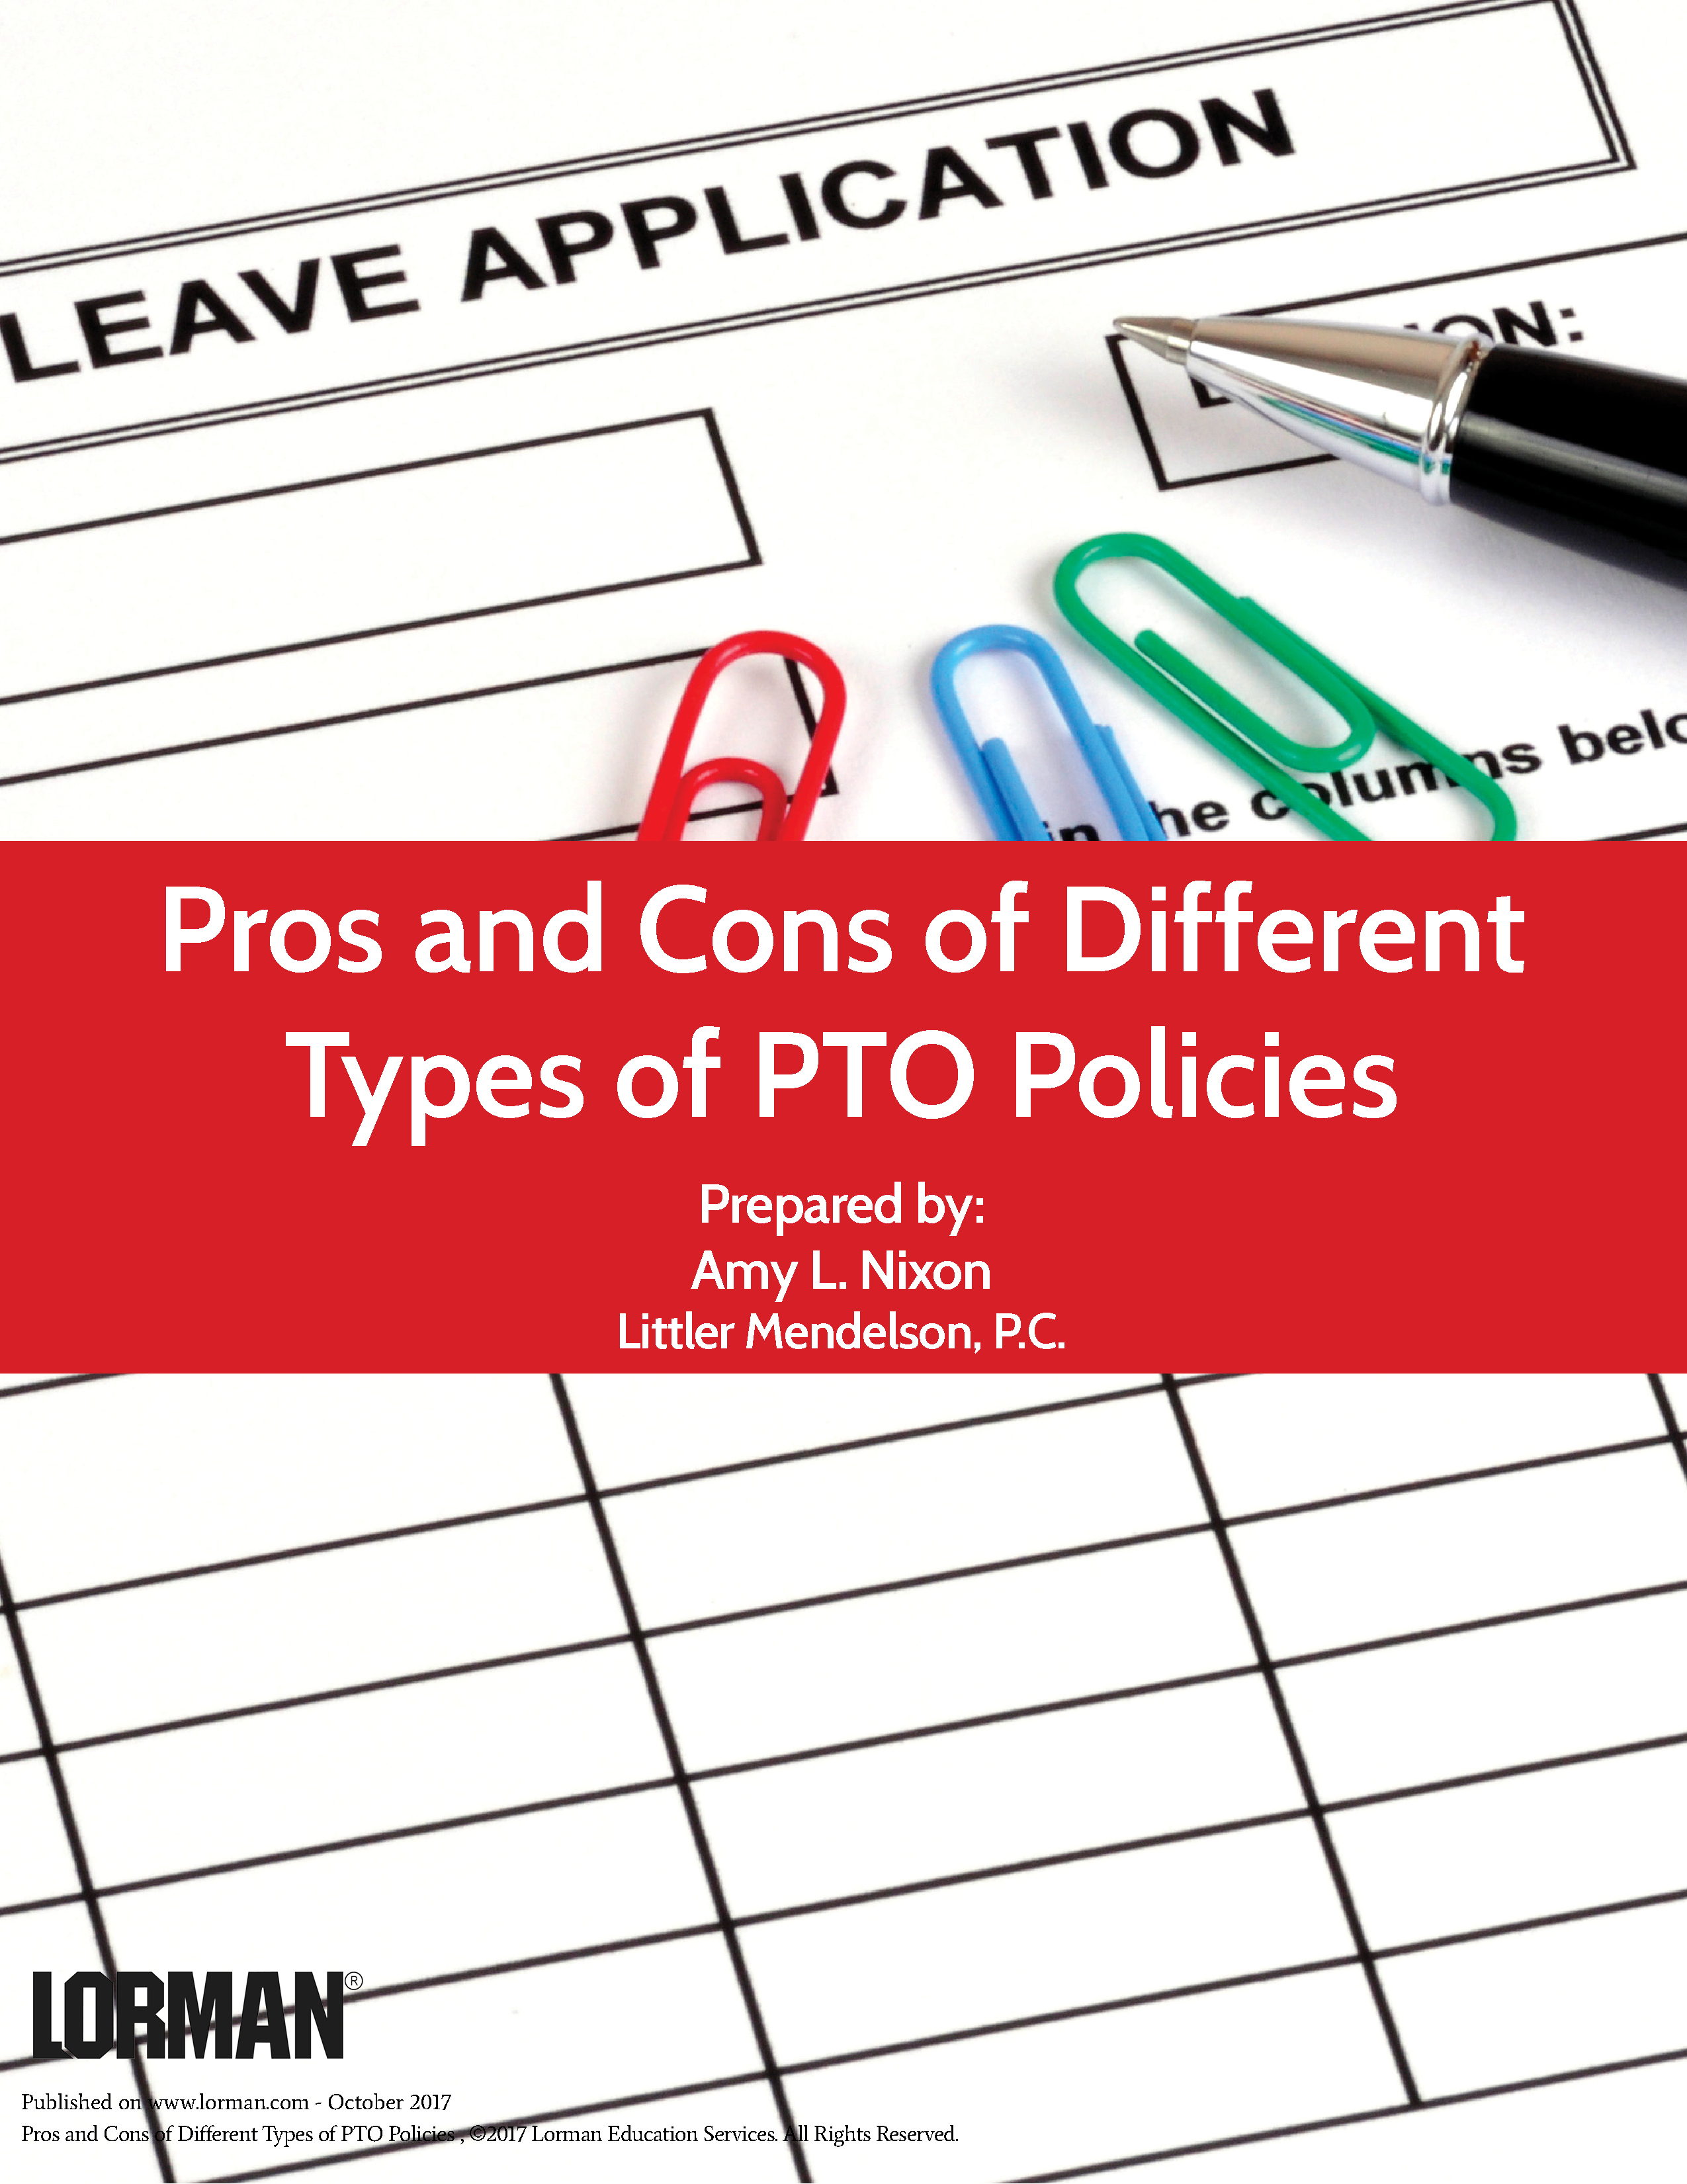 Pros and Cons of Different Types of PTO Policies